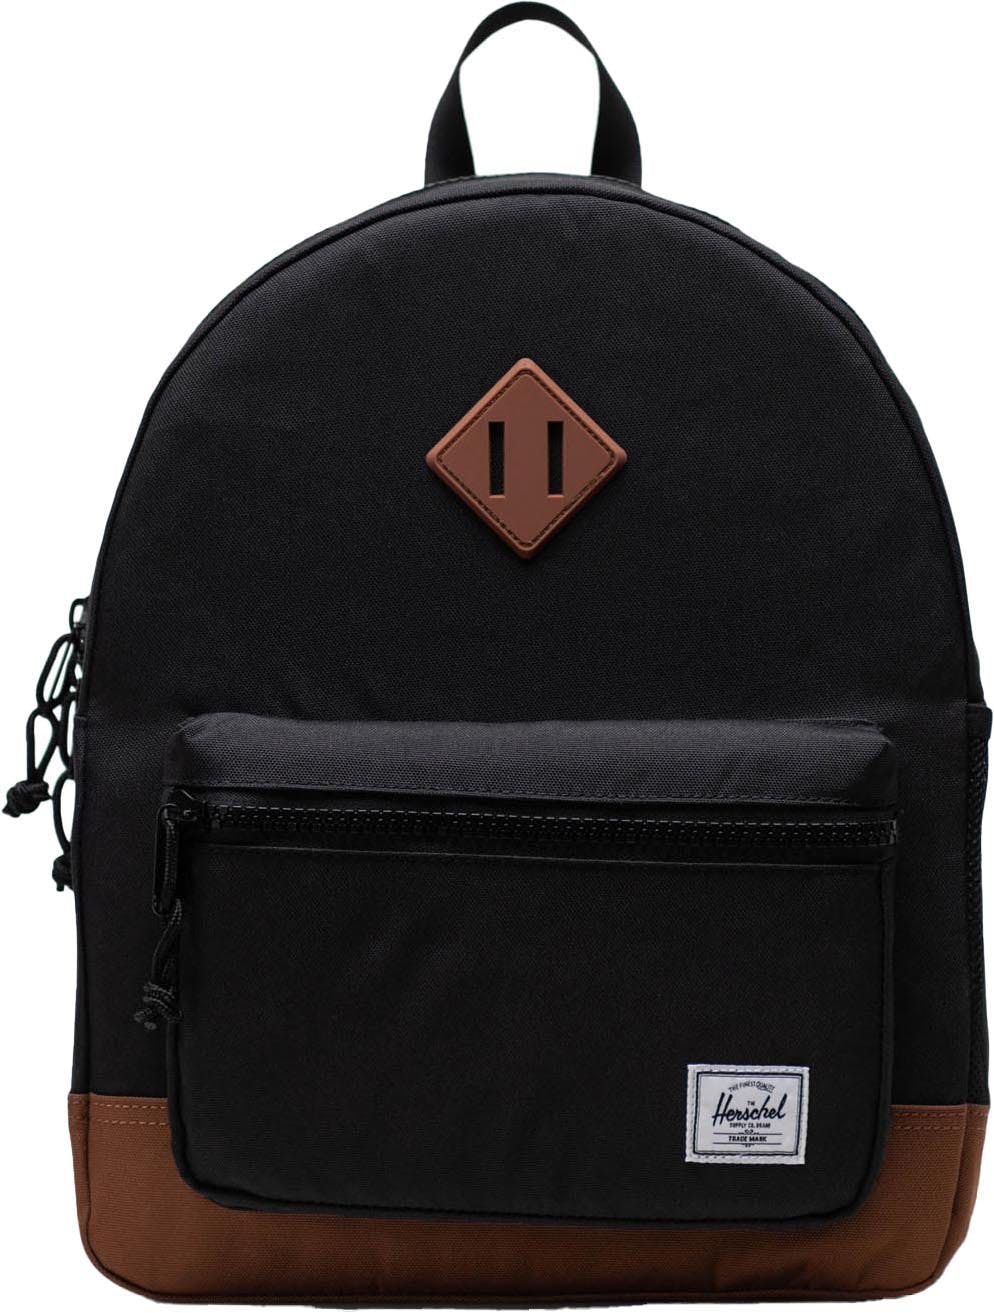 Product image for Herschel Heritage Backpack 20L - Youth